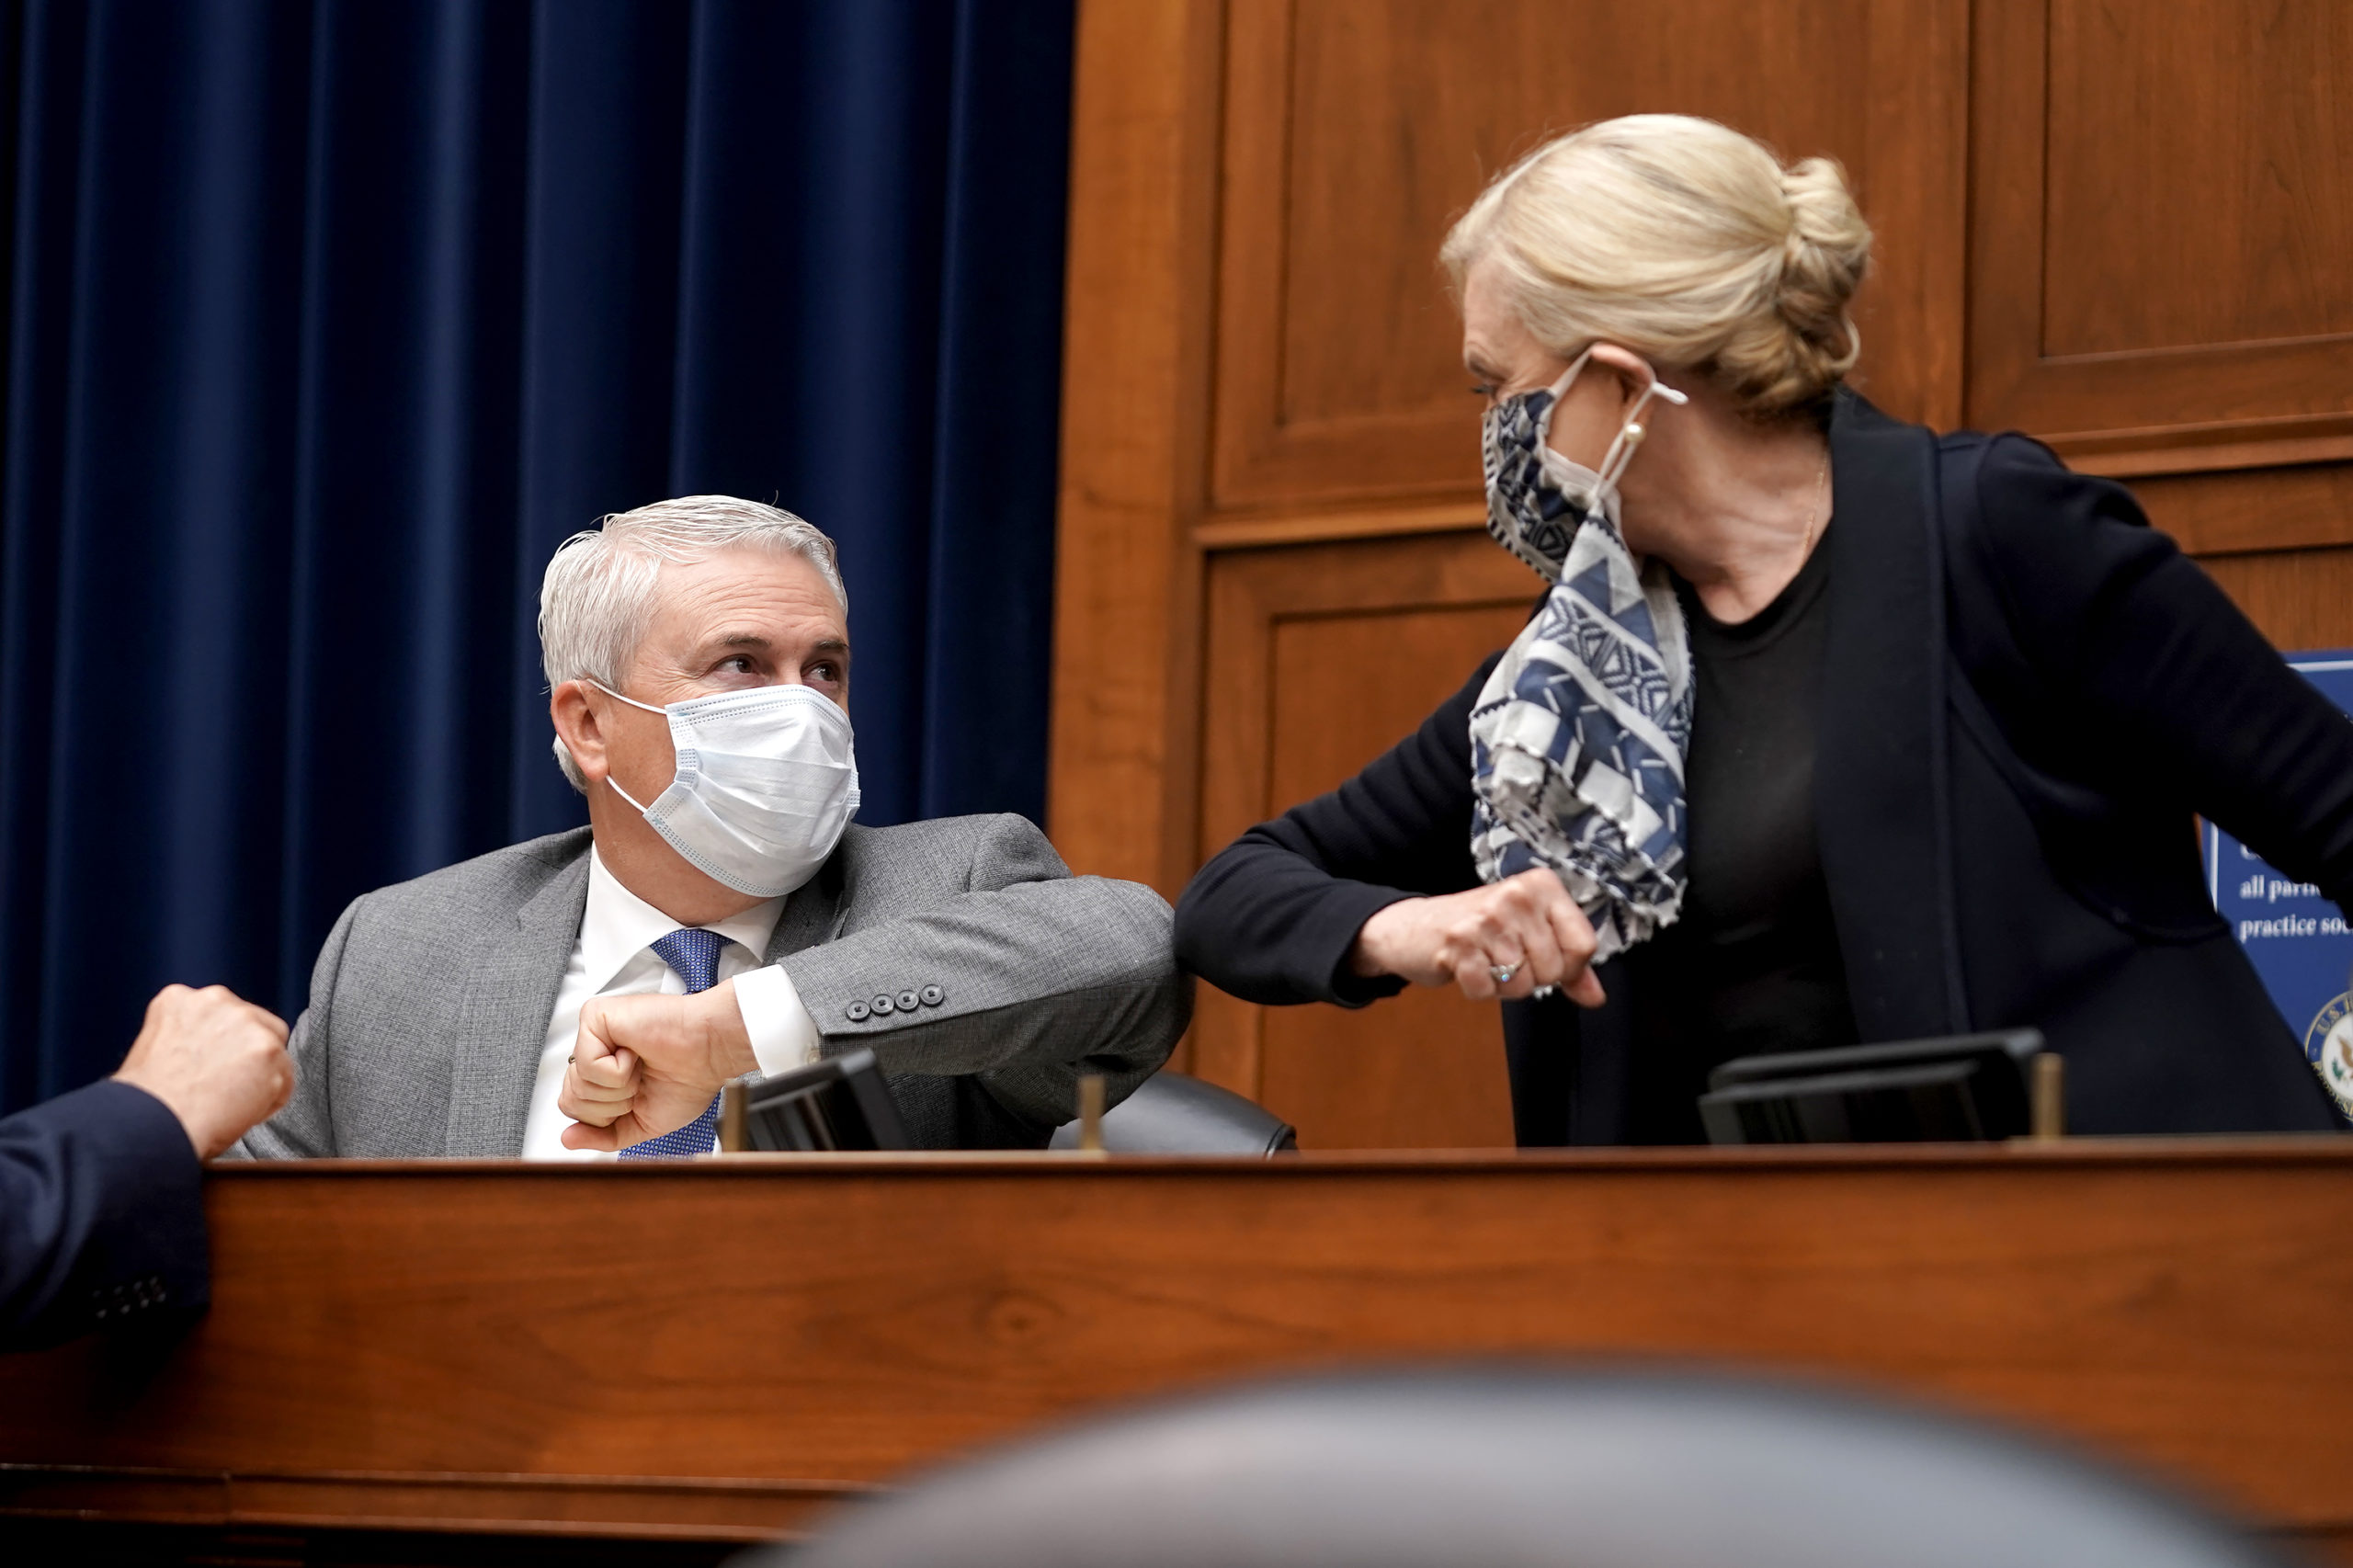 Oversight Ranking Member James Comer elbow bumps Oversight Chairwoman Carolyn Maloney prior to a hearing on Sept. 30, 2020. (Greg Nash/Pool/Getty Images)